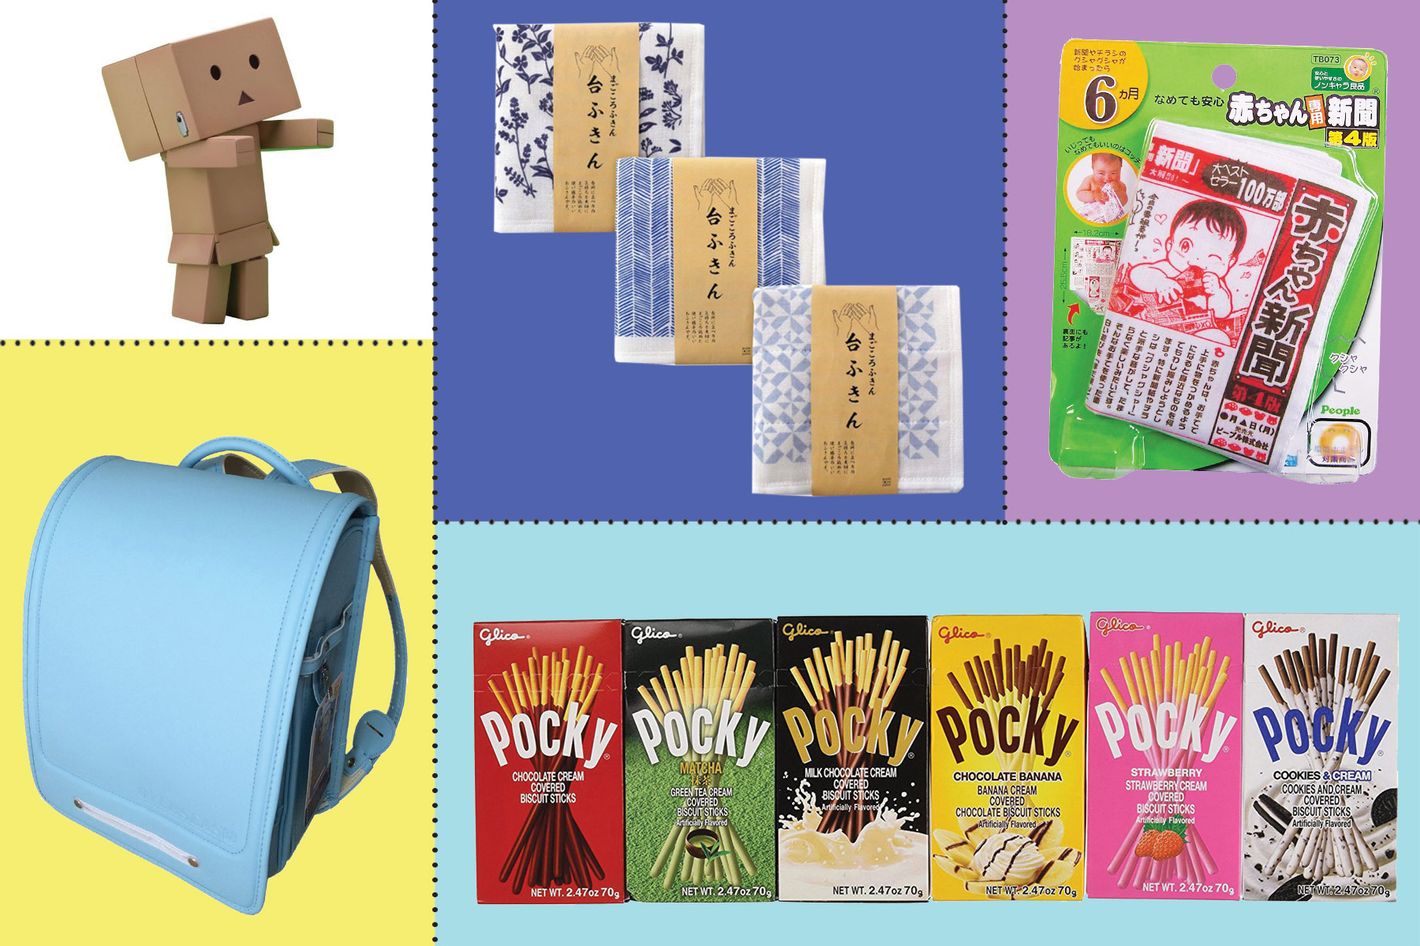 17 best Japanese products and gadgets you need in your life